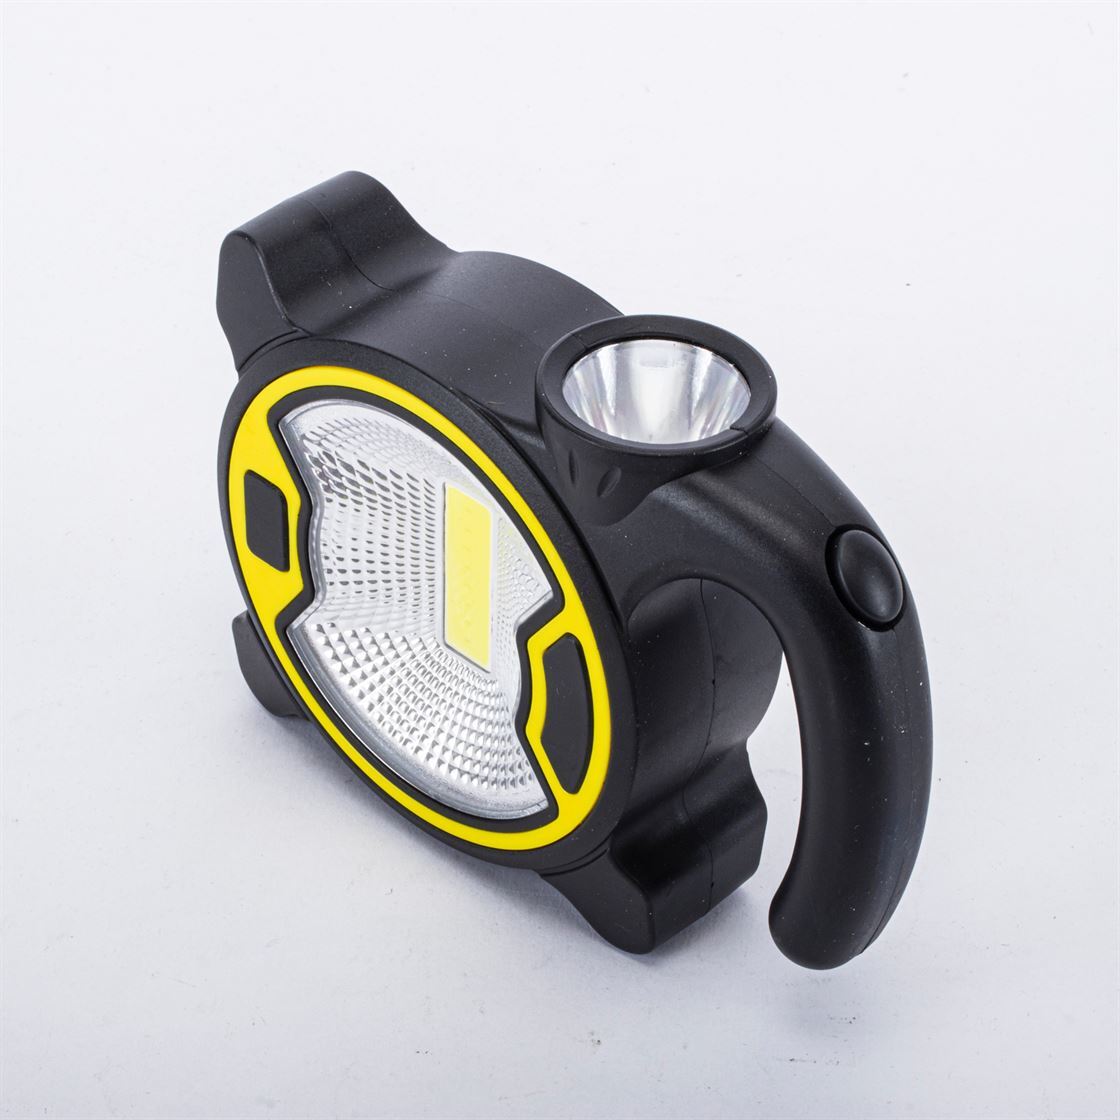 2-in-1 COB Portable Battery Operated LED Worklight- alt image 2